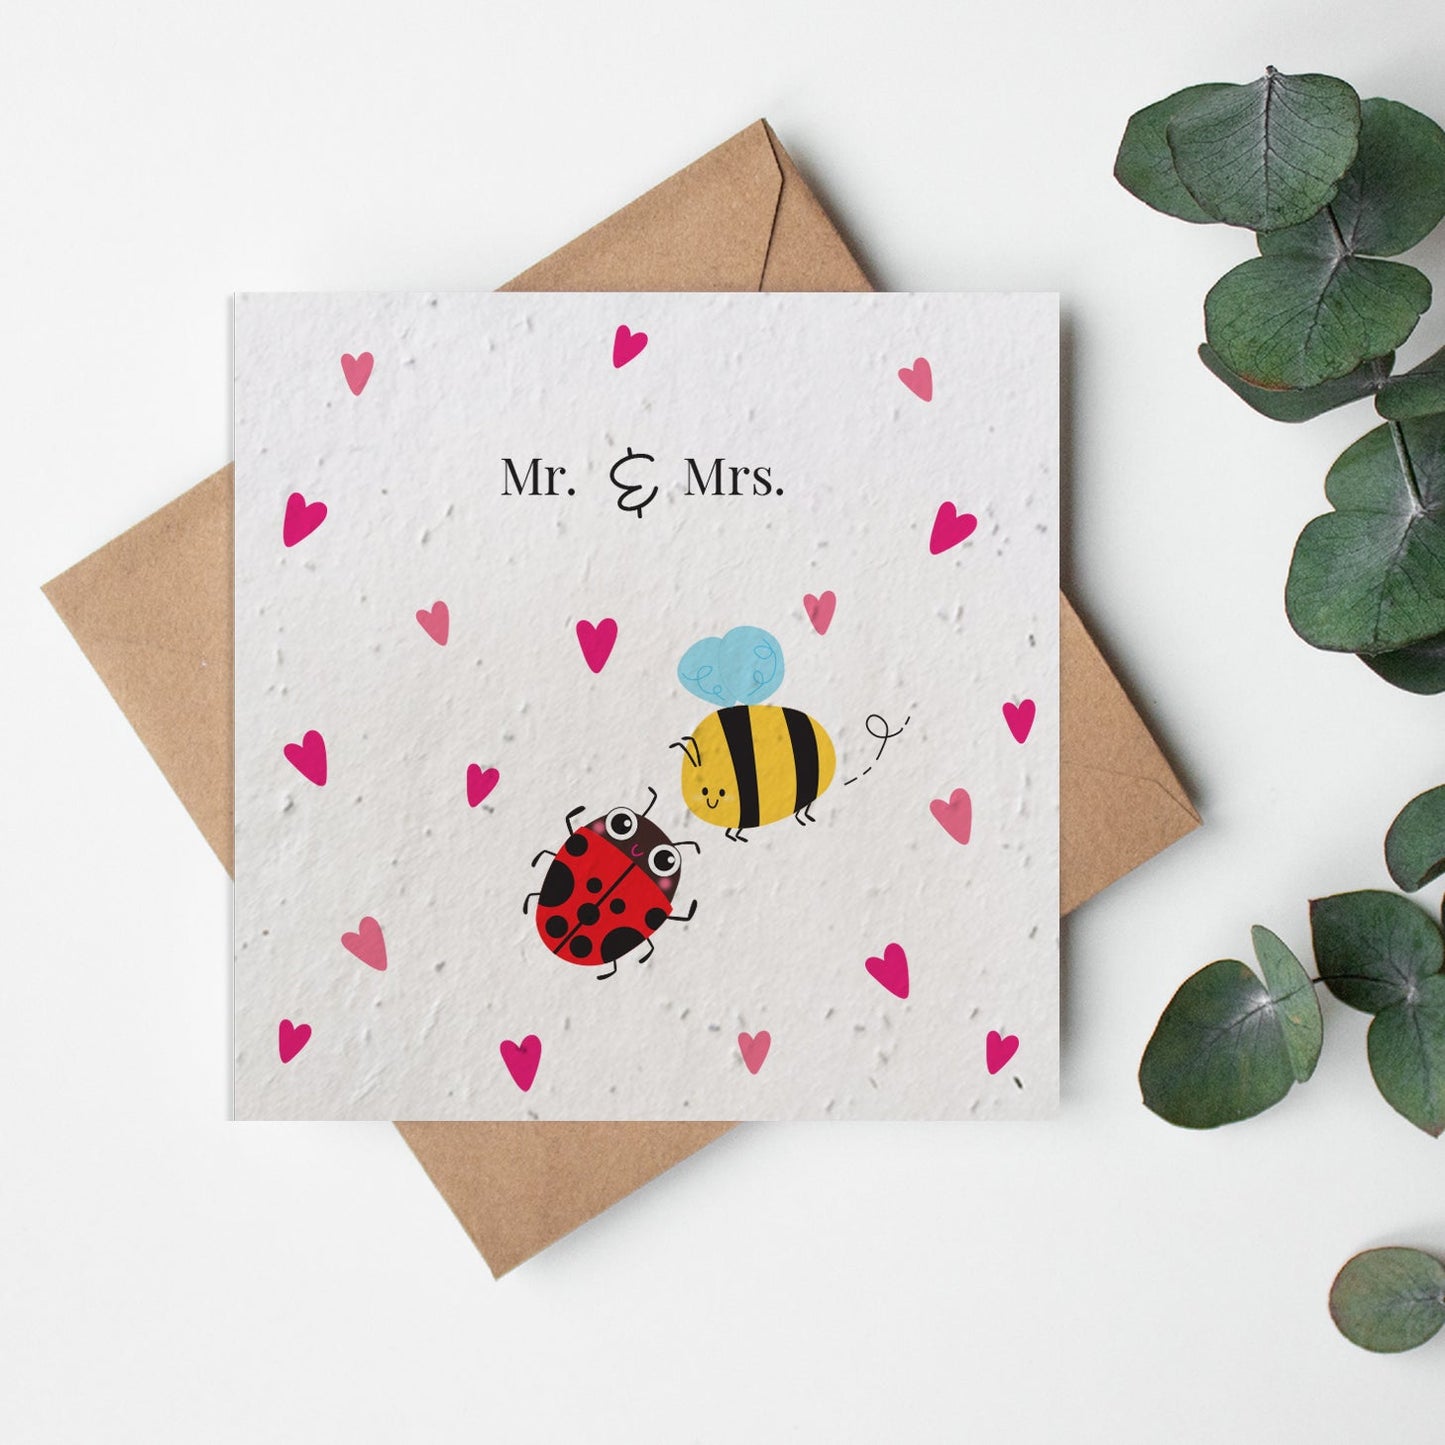 Bugs - Mr and Mrs bees